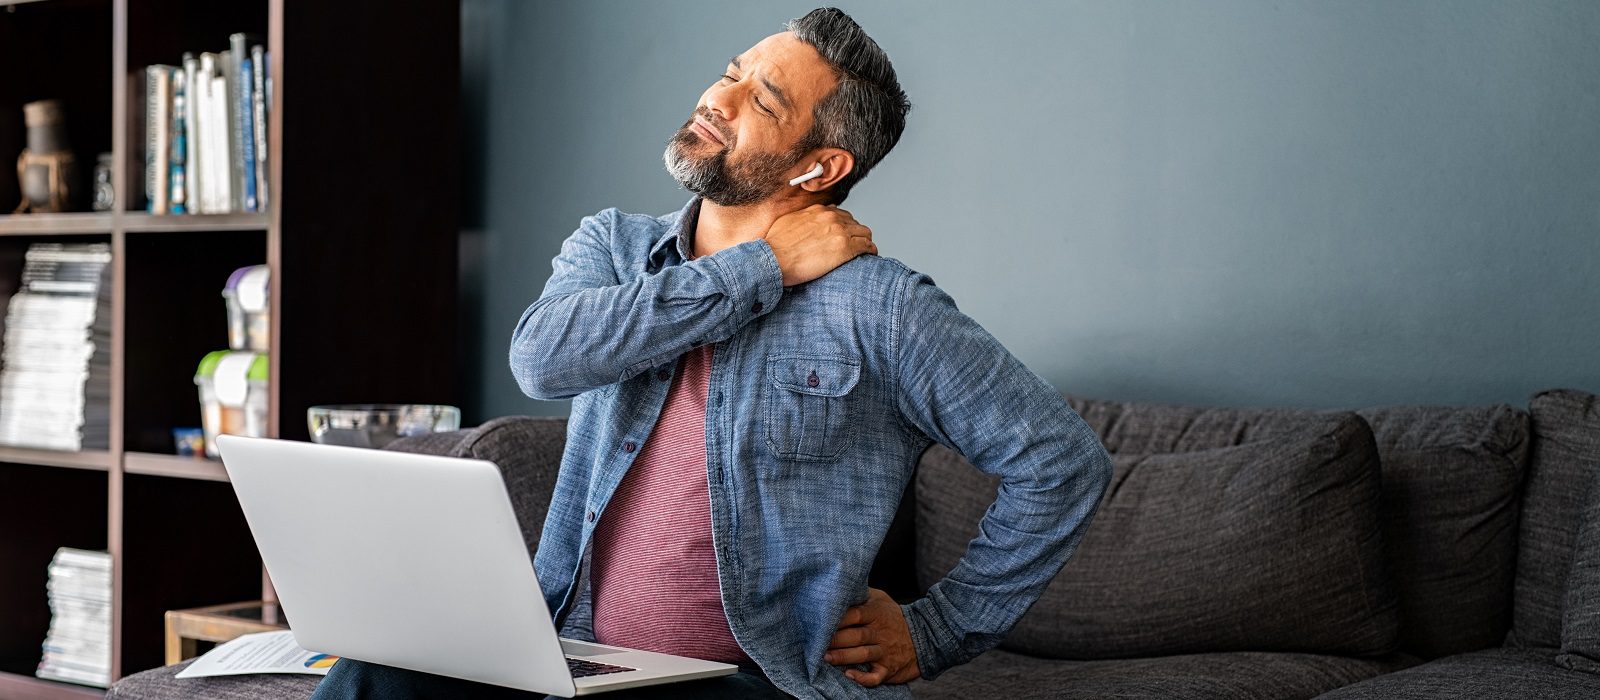 Mature indian man suffering from shoulder and back pain while sitting on couch and working from home on laptop. Indian middle aged business man in casual clothing stretching neck while working on laptop. Stressed middle eastern businessman suffering from neck pain.